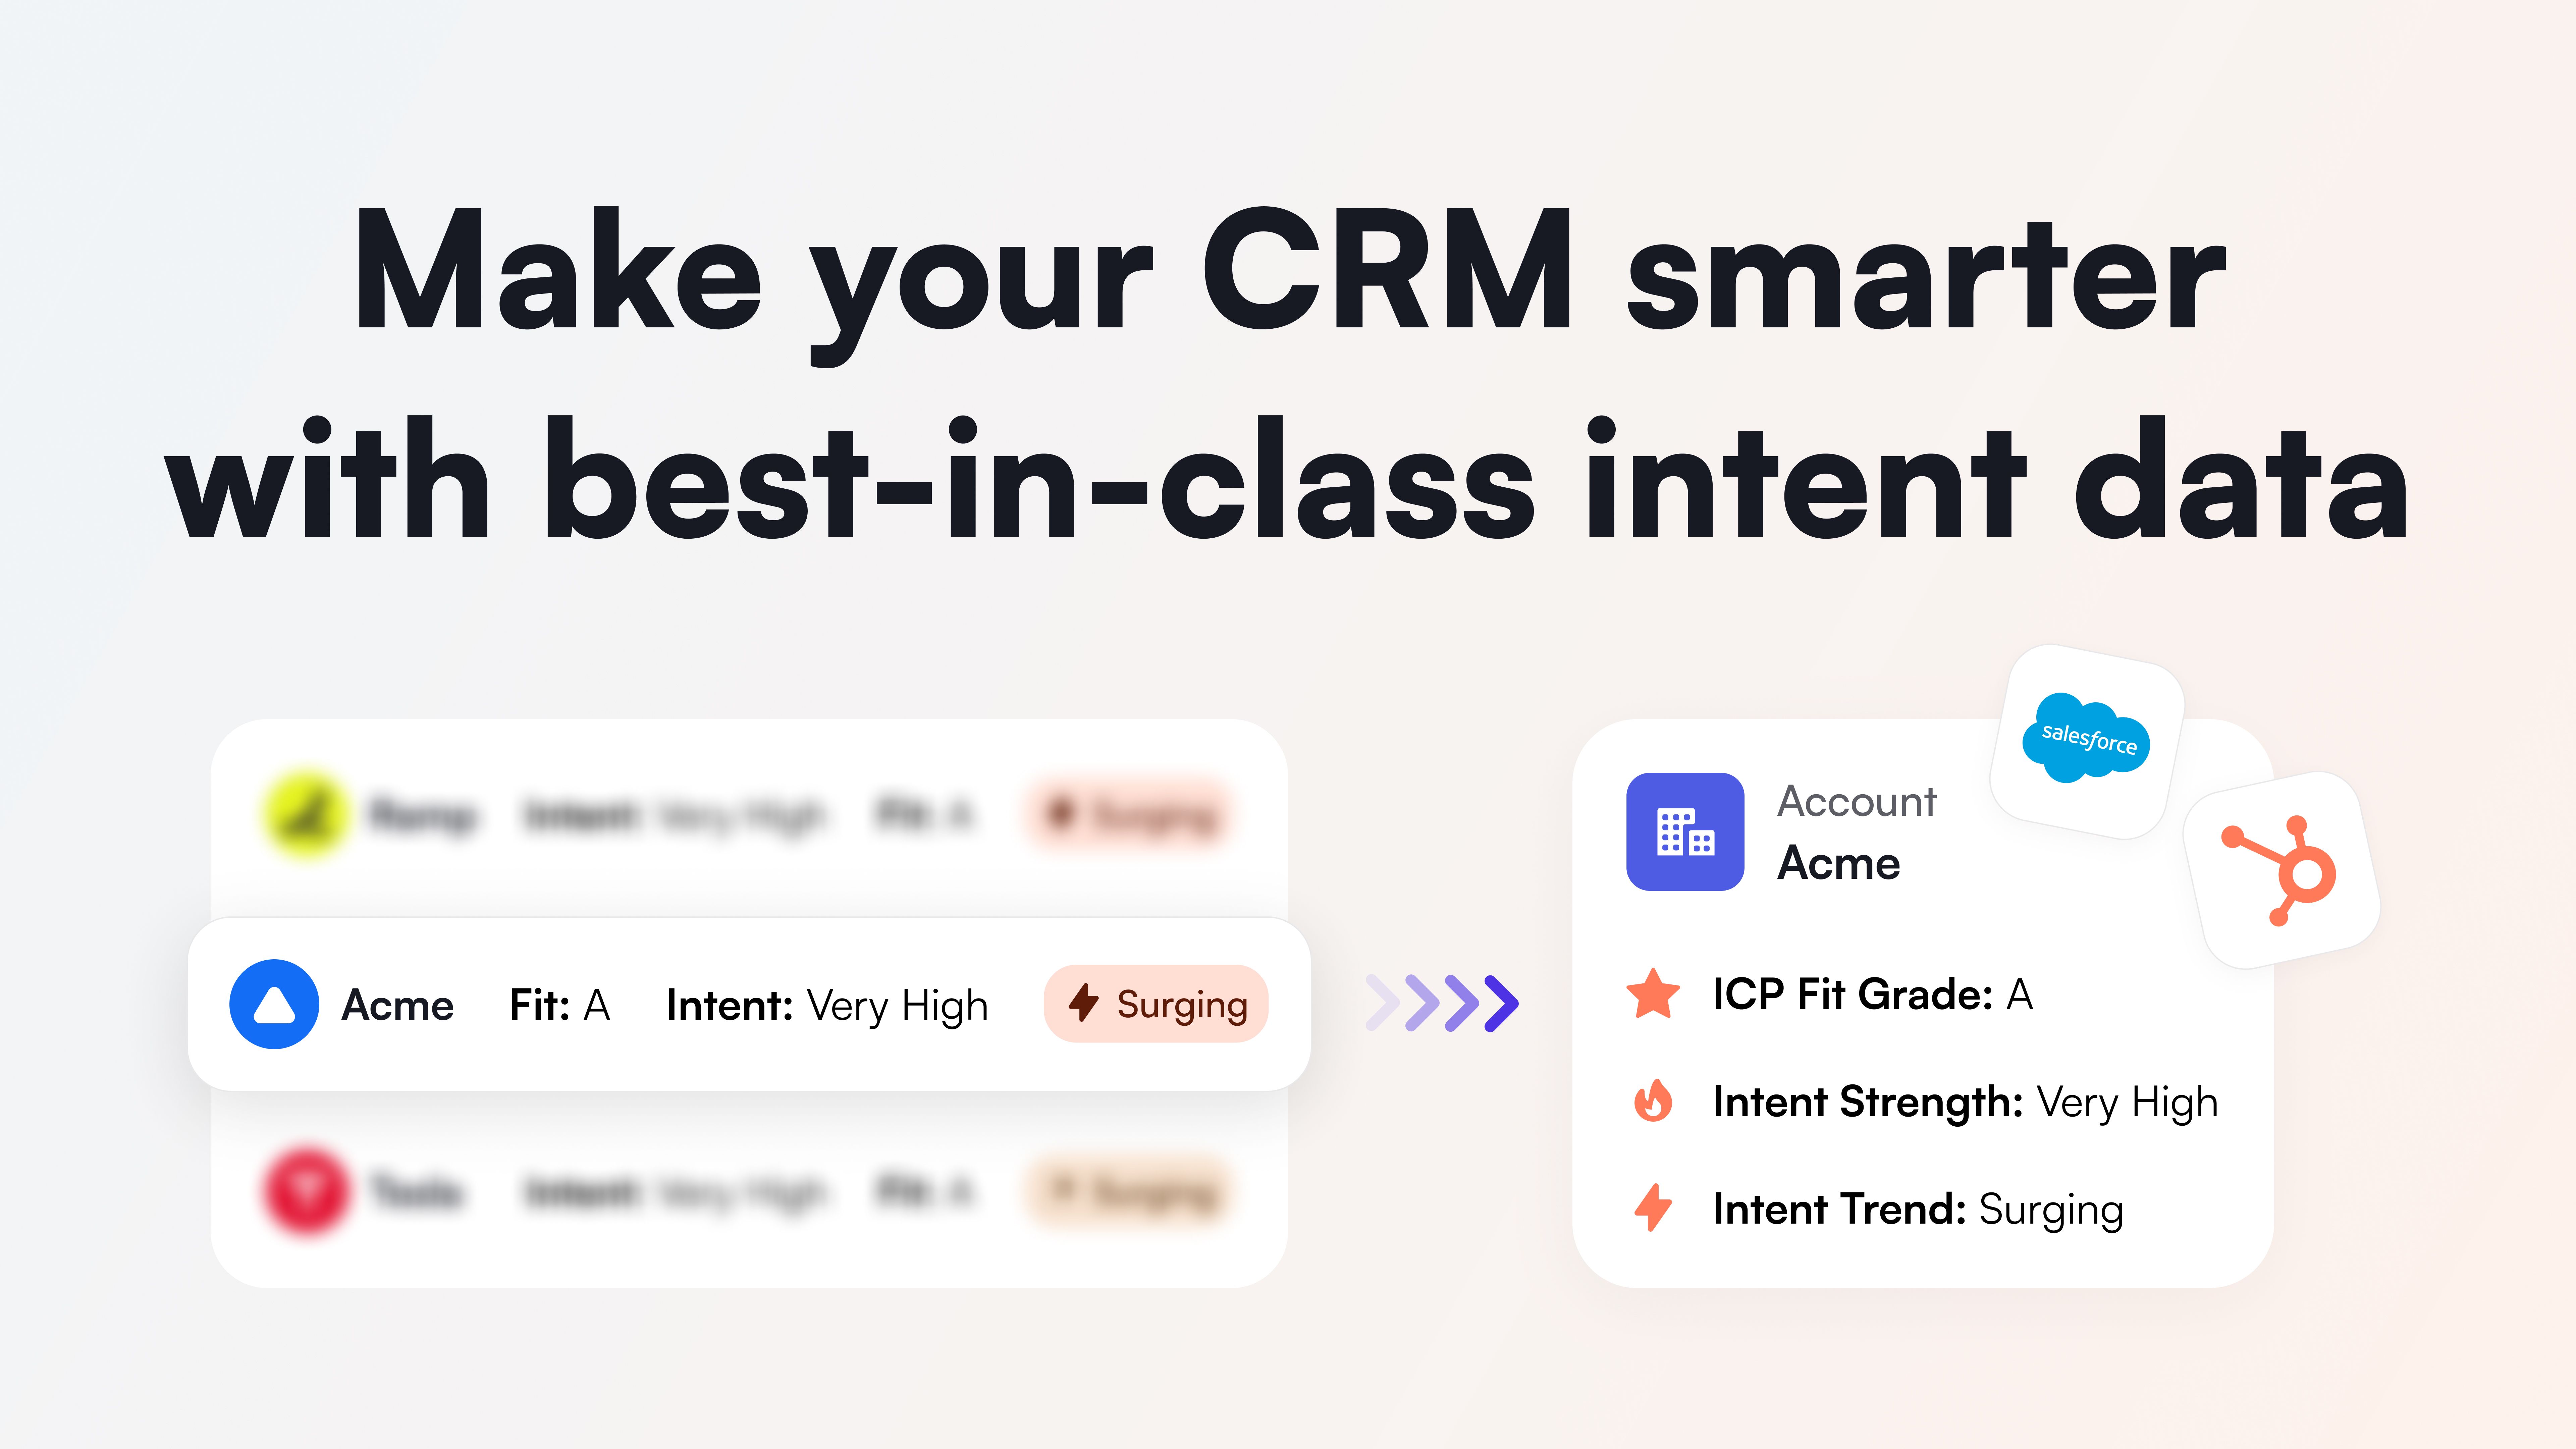 Make Your CRM Smarter with Best-In-Class Intent Data